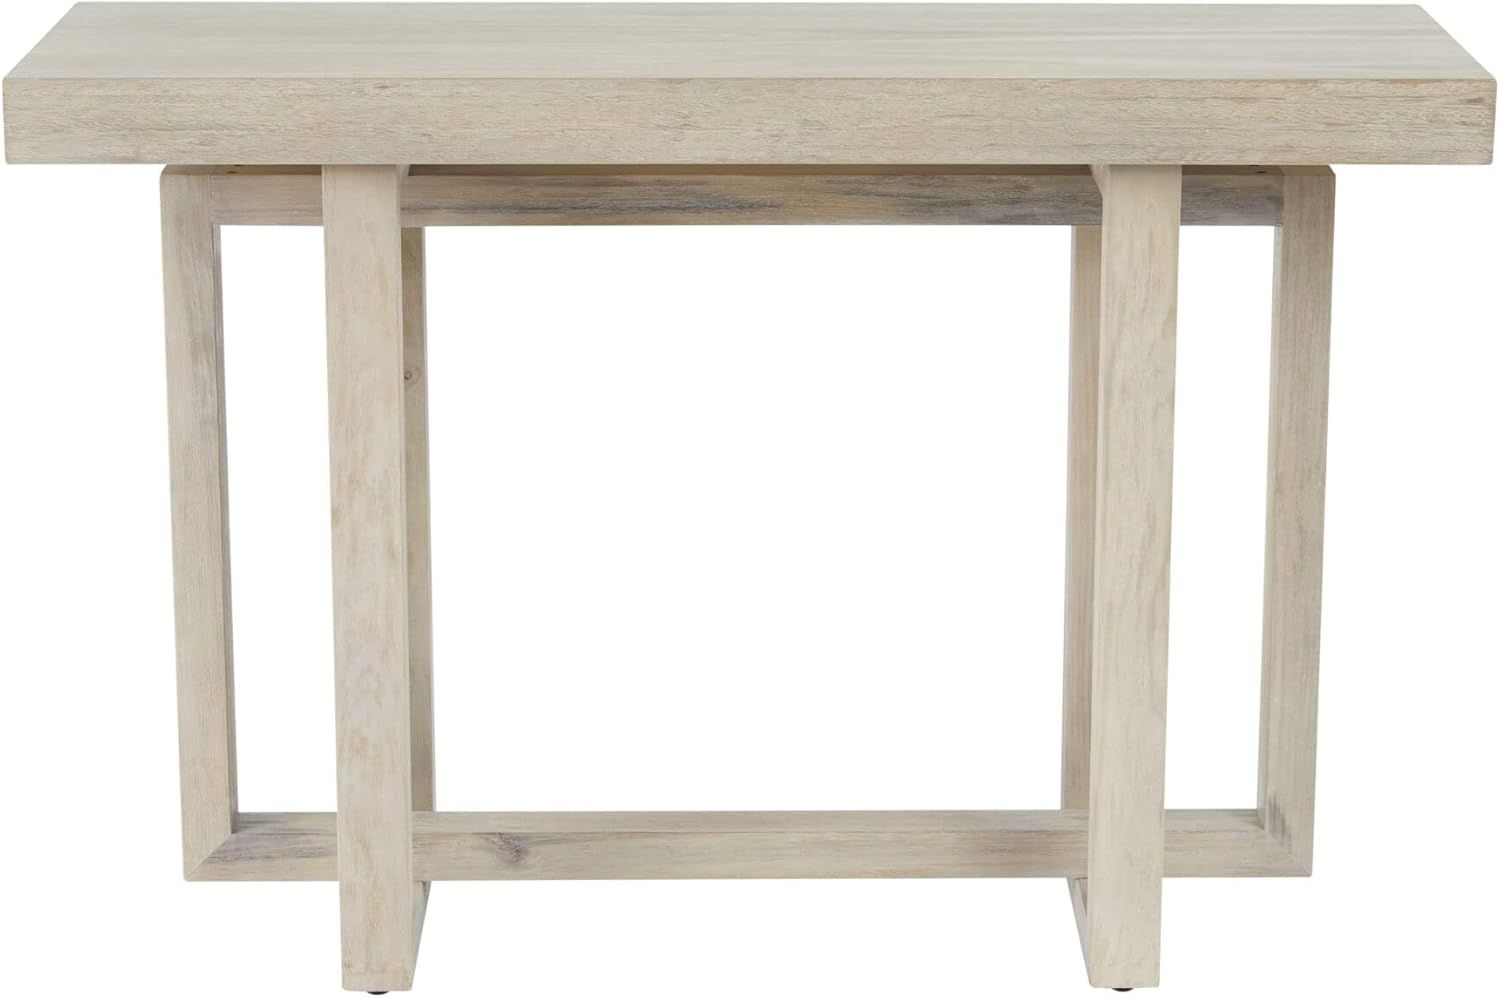 Jalisco Contemporary/Modern Style Wood Console Table, Barley | Amazon (US)